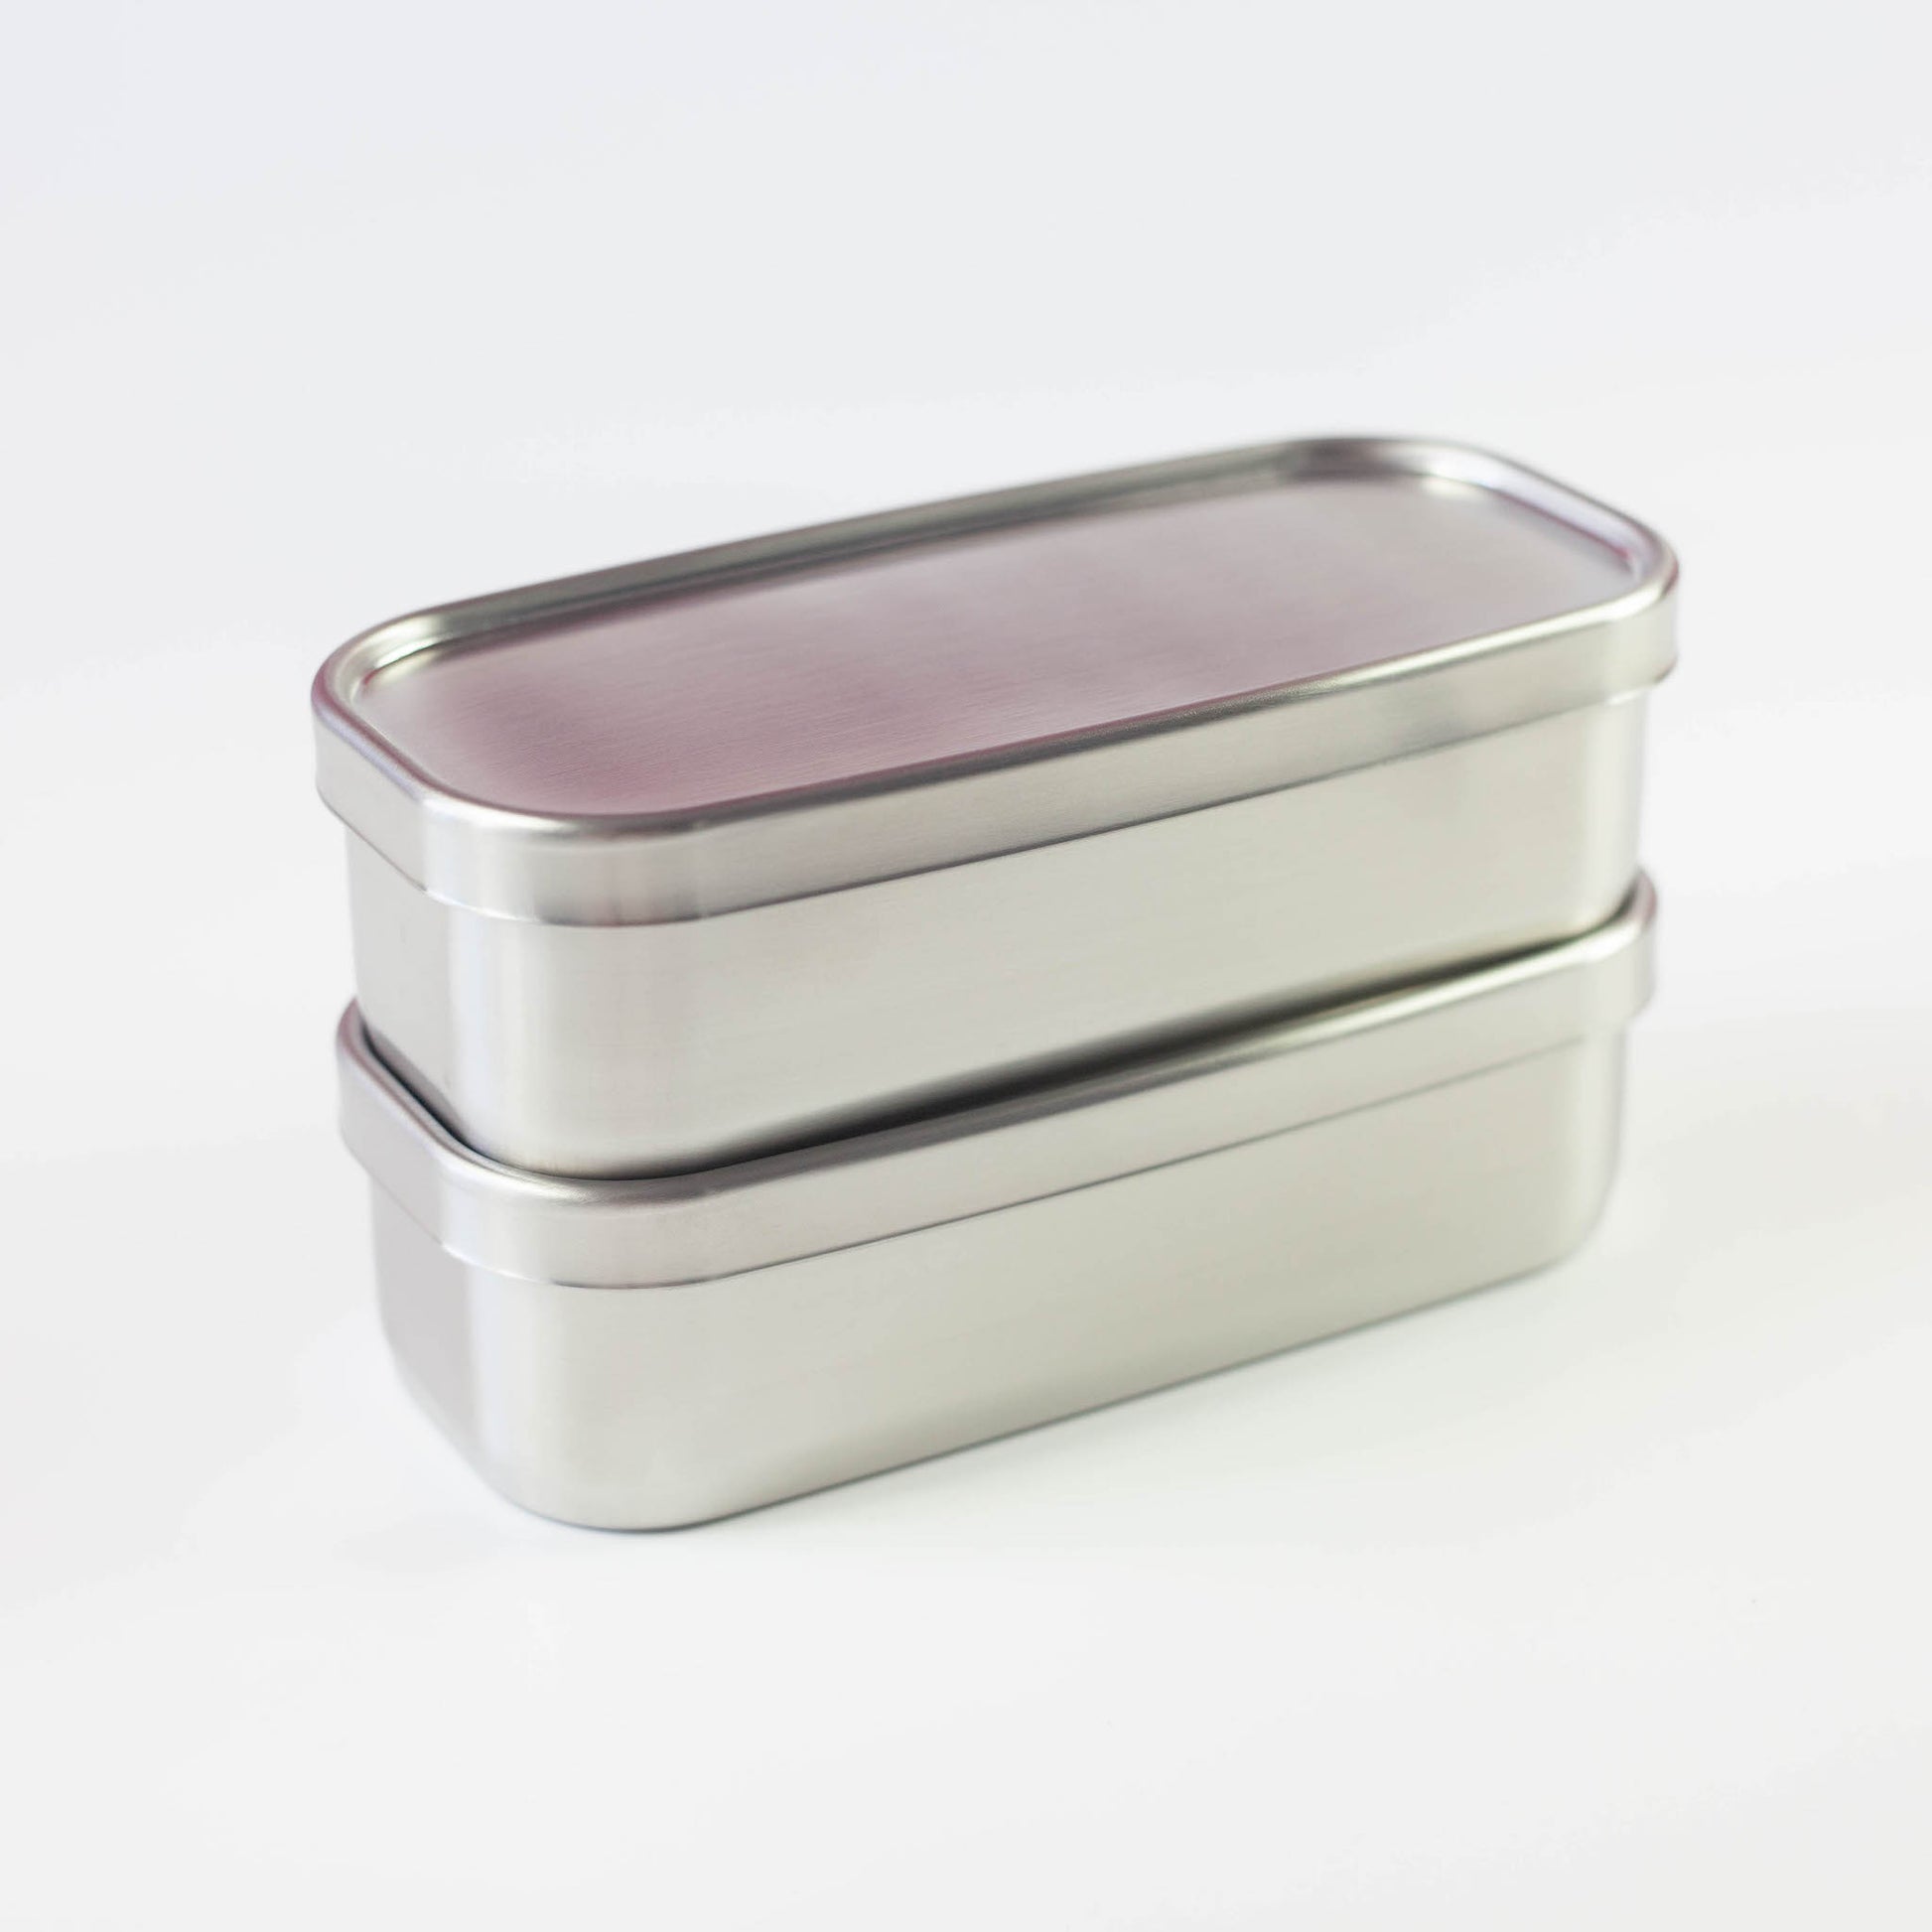 The perfect gift Kobo Aizawa Stainless Steel Bento Box for any occasion